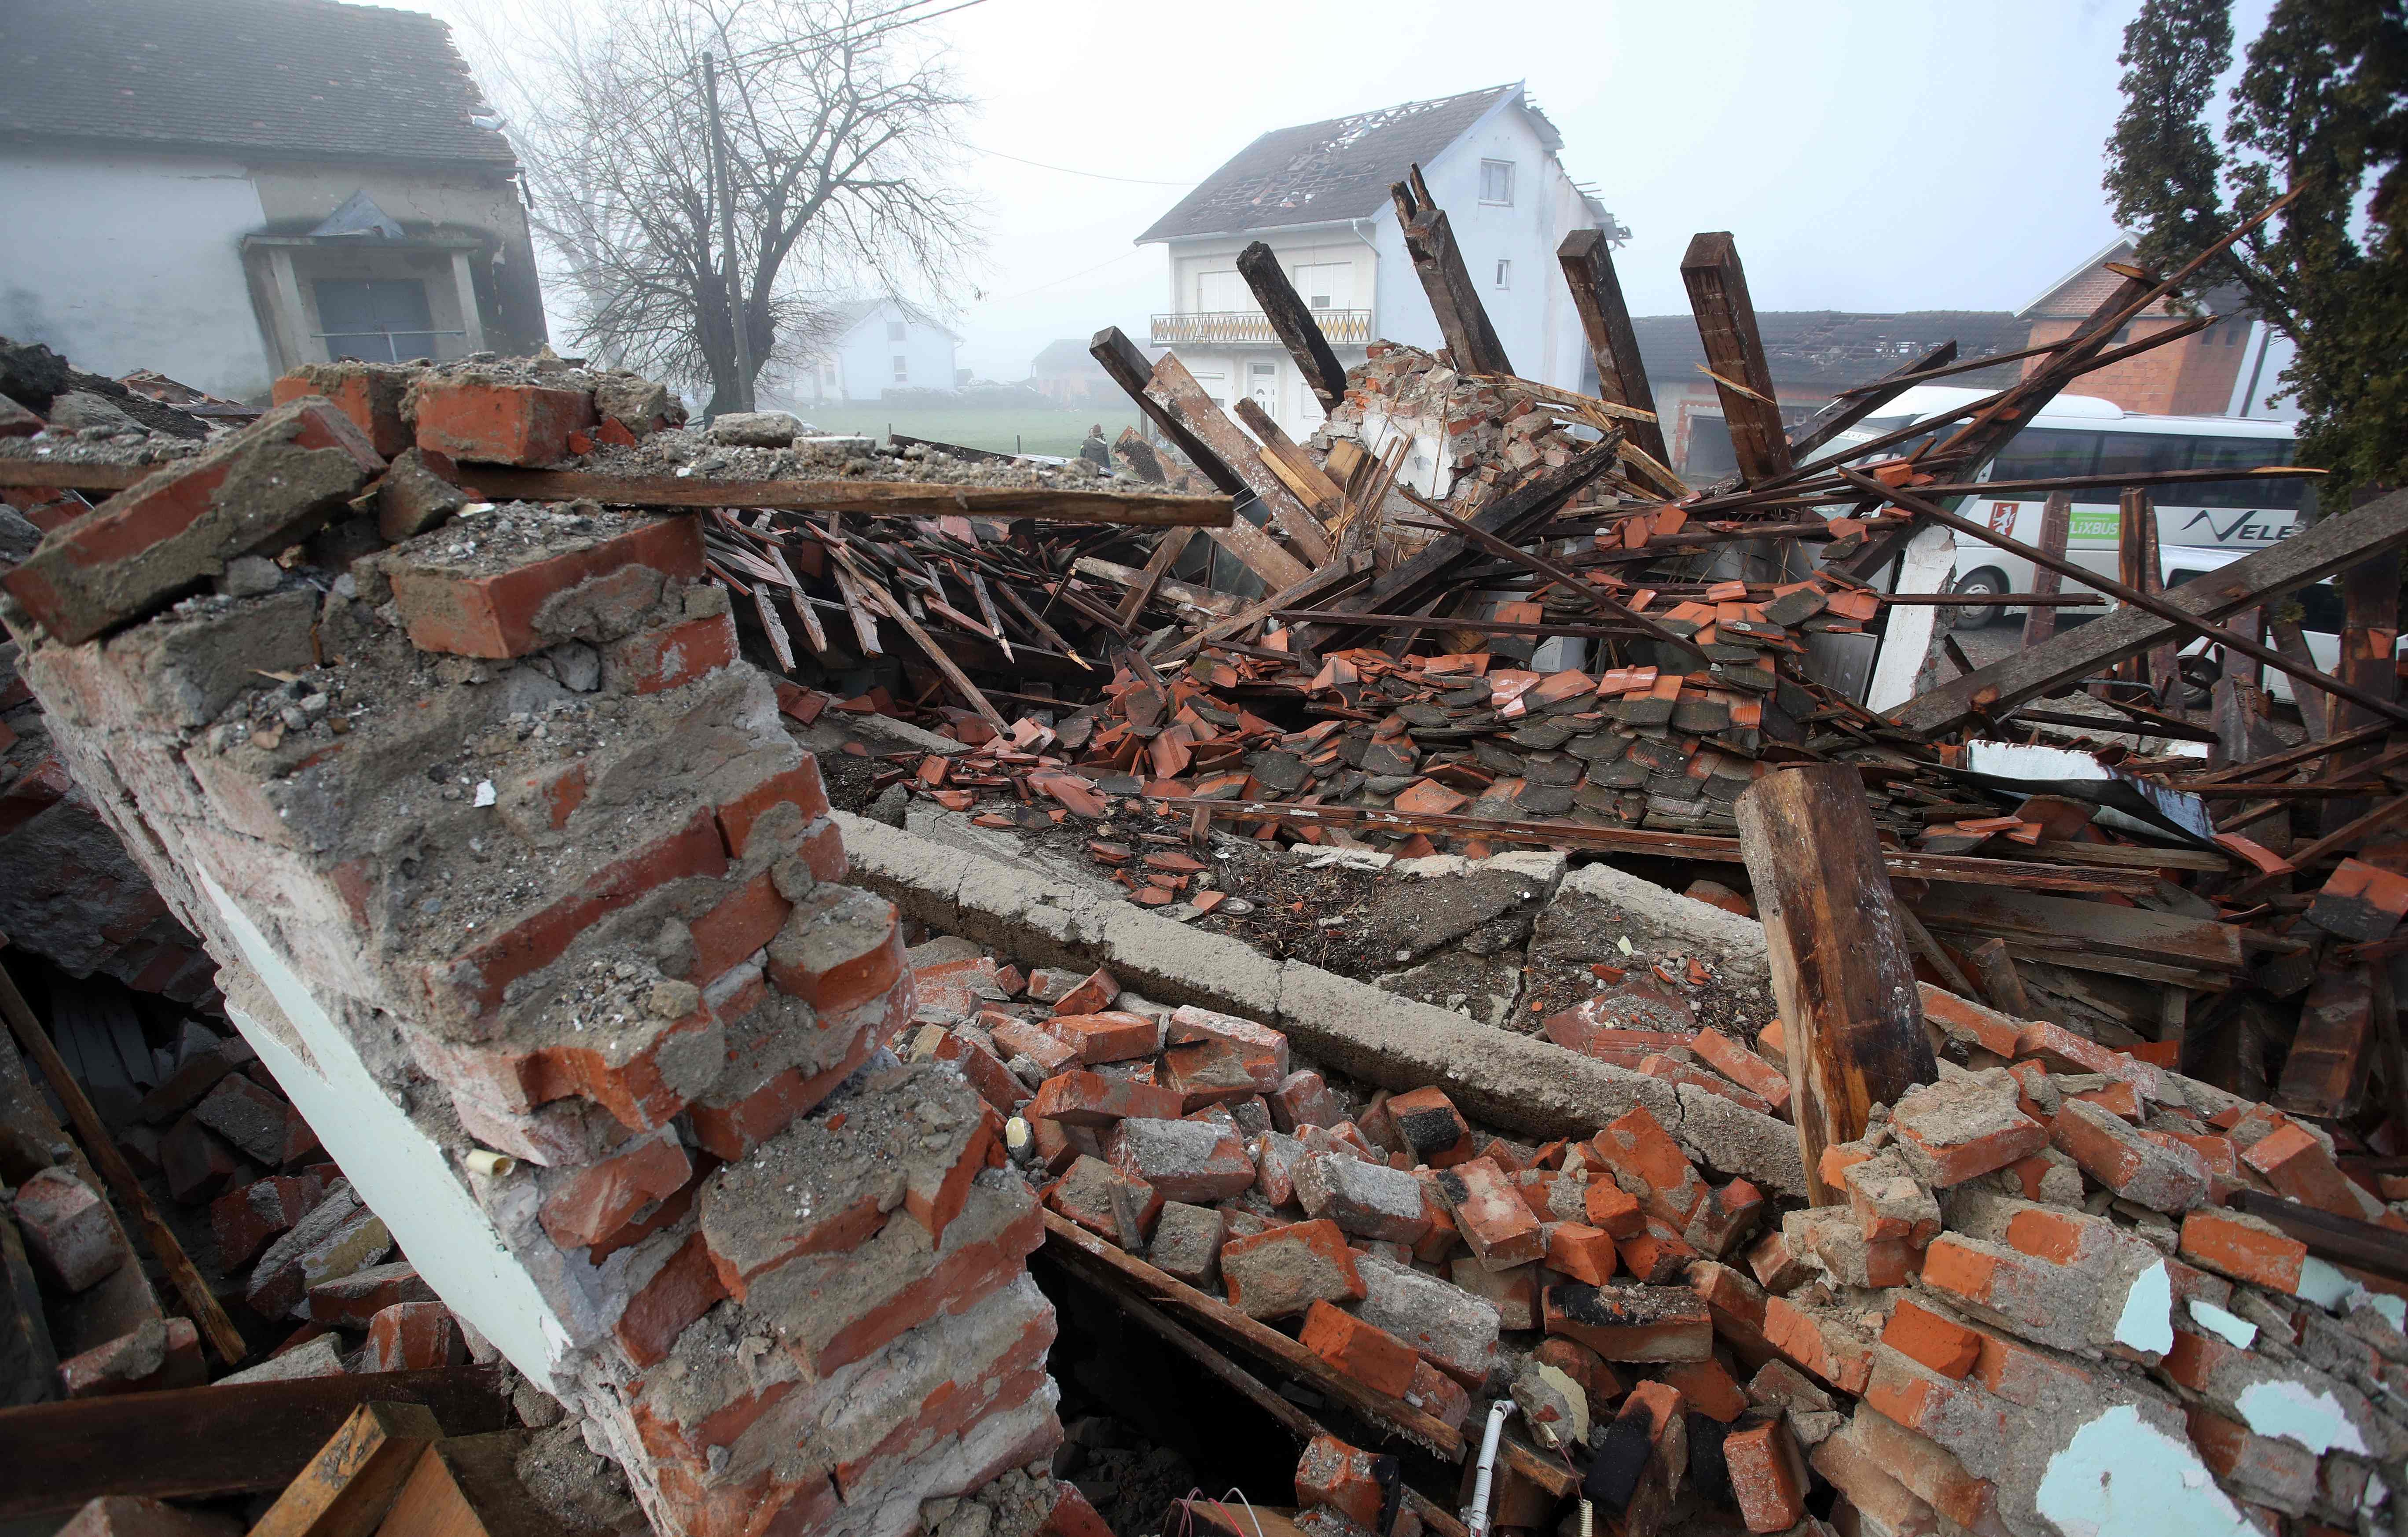   Picture taken on December 30, 2020 shows the rubble of a destroyed building in the village of Majske Poljane, where 5 people died, some 50kms from Zagreb, a day after the region was hit by a 6.4-magnitude quake. - Fresh tremors shook Croatia on on December 30, 2020 as the Adriatic country was still picking up the pieces of a deadly earthquake that claimed seven lives and reduced buildings to rubble the day before. The aftershocks jangled nerves in towns south of Zagreb where the quake left gaping holes in buildings and crushed cars under mountains of bricks. Credit: AFP Photo